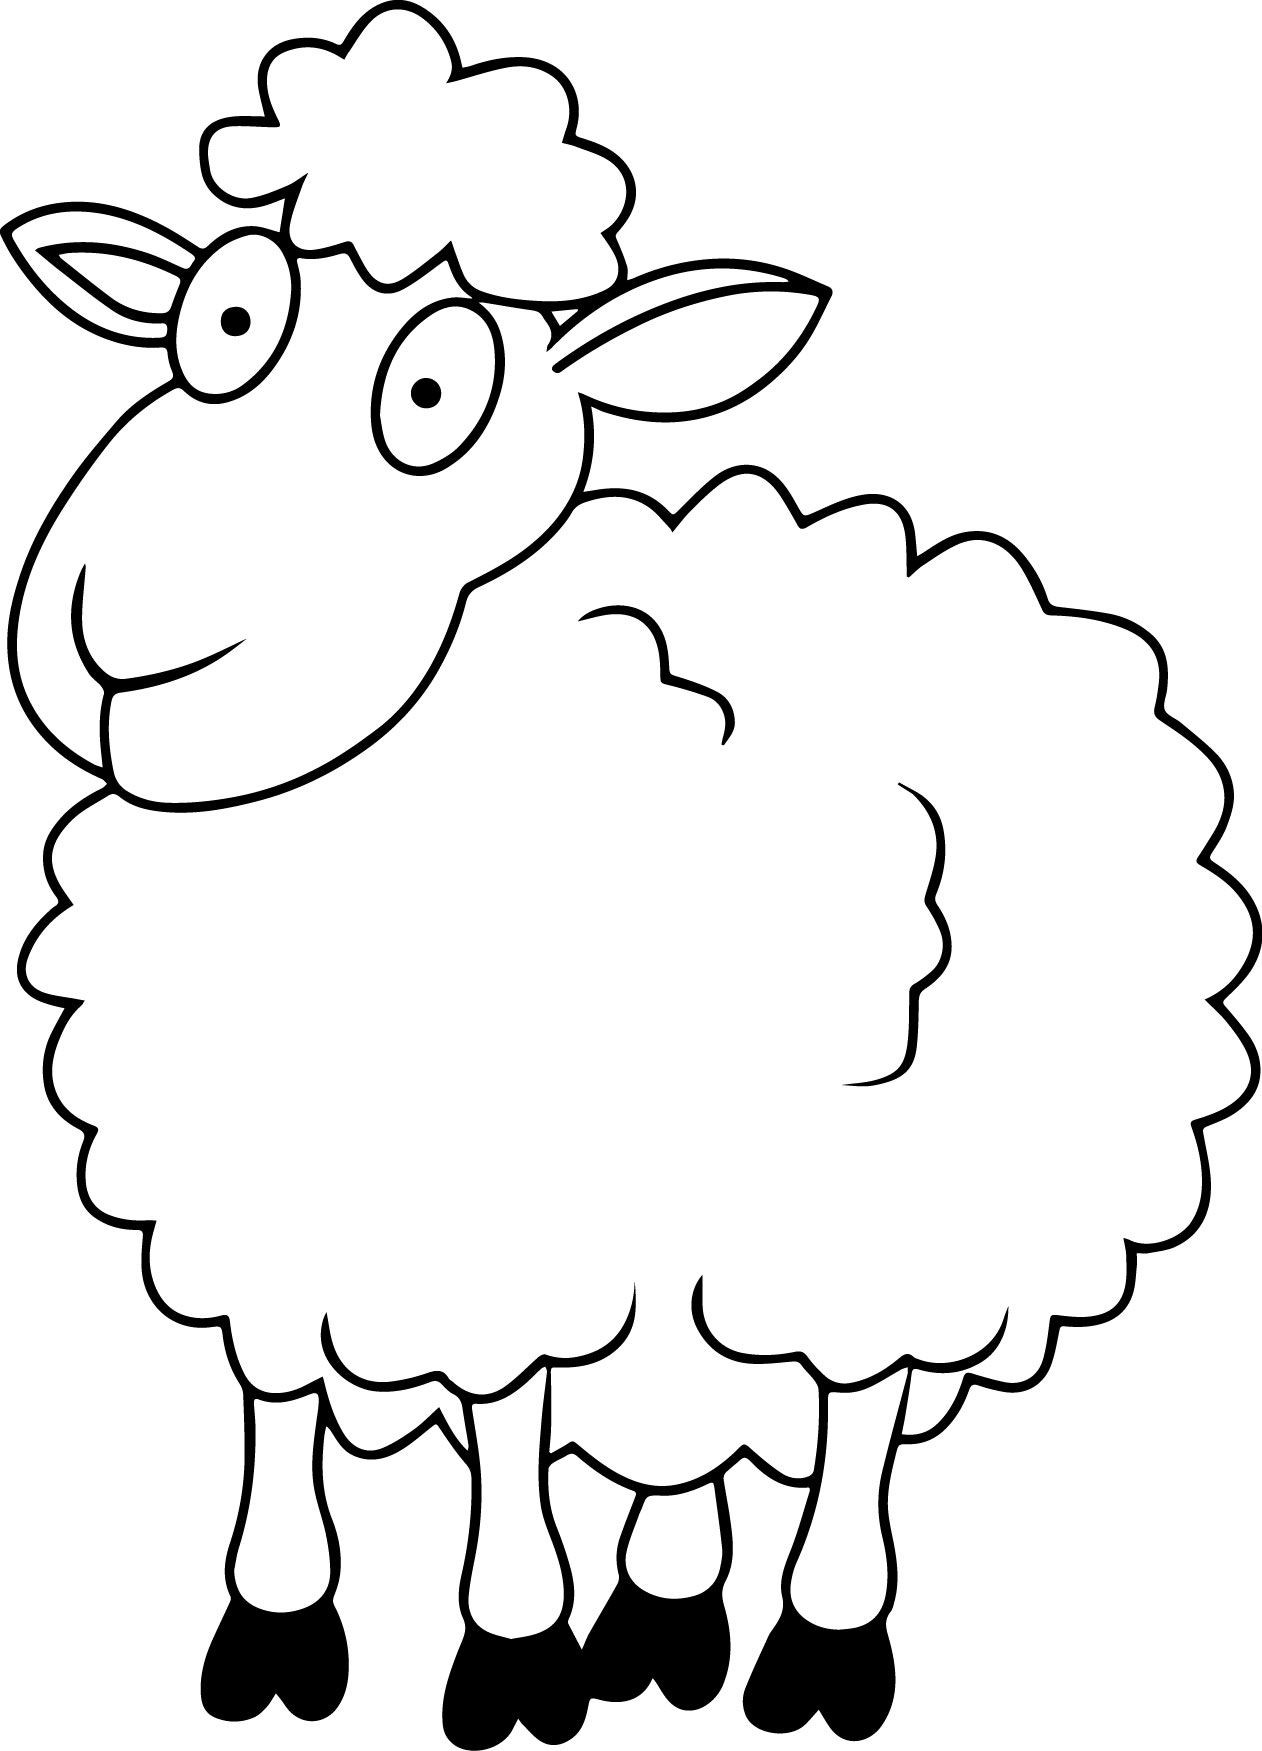 Sheep Coloring Sheet
 Sheep Outline Coloring Page Coloring Home